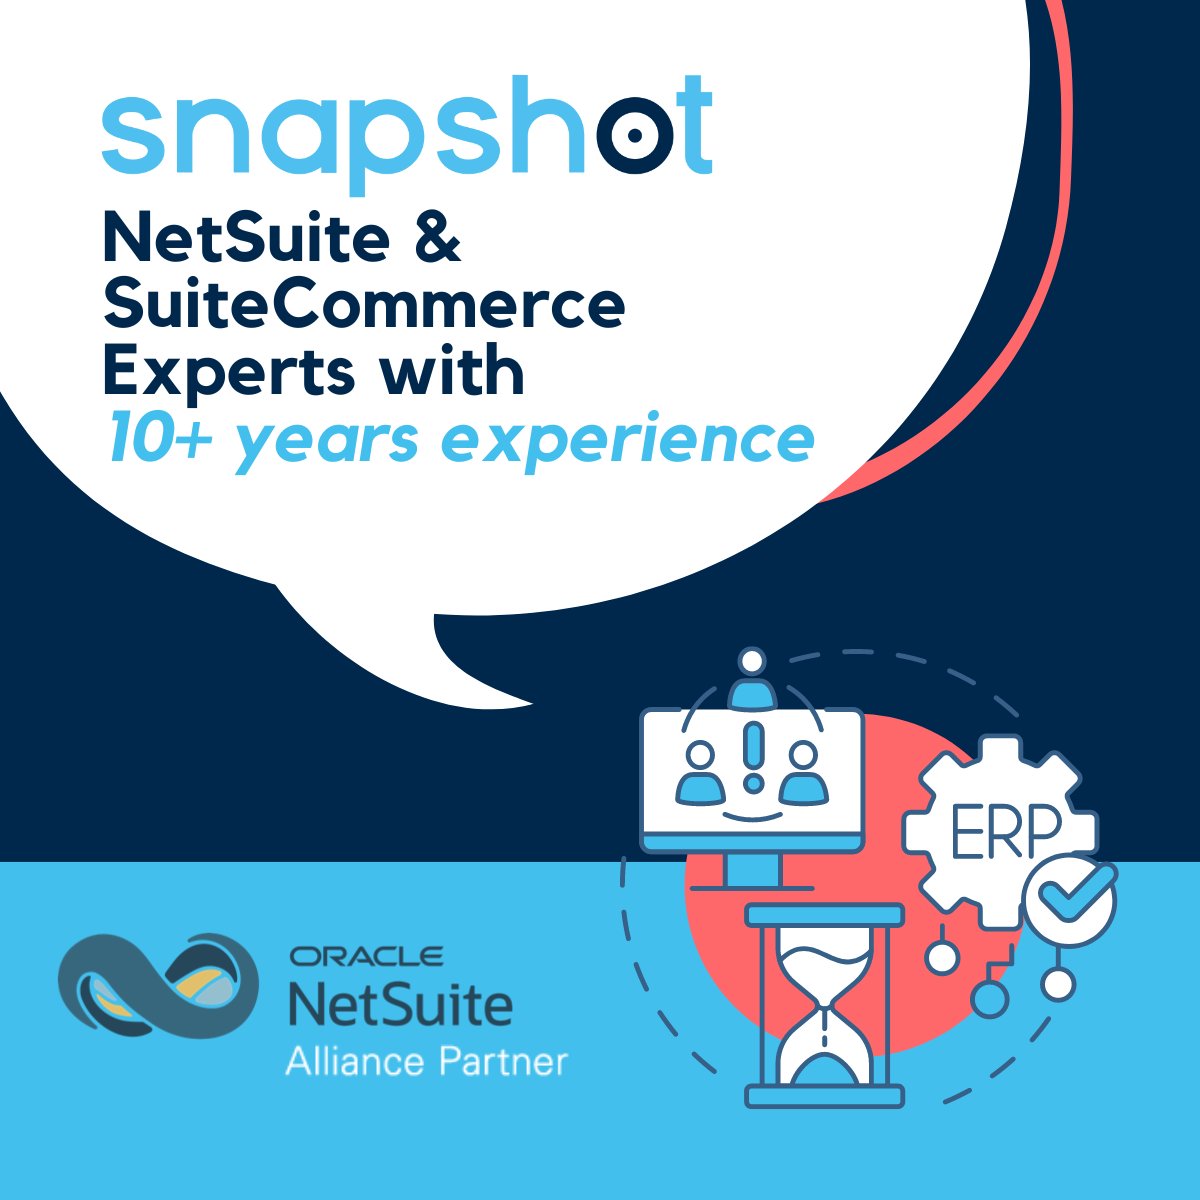 At Snapshot, we've been @NetSuite and #SuiteCommerce experts for over 10 years.  Whether you're considering a full site implementation, data migration, or enhancing your existing store, our team can guide you through the process seamlessly.

hubs.la/Q02w-X0w0

#NetSuite